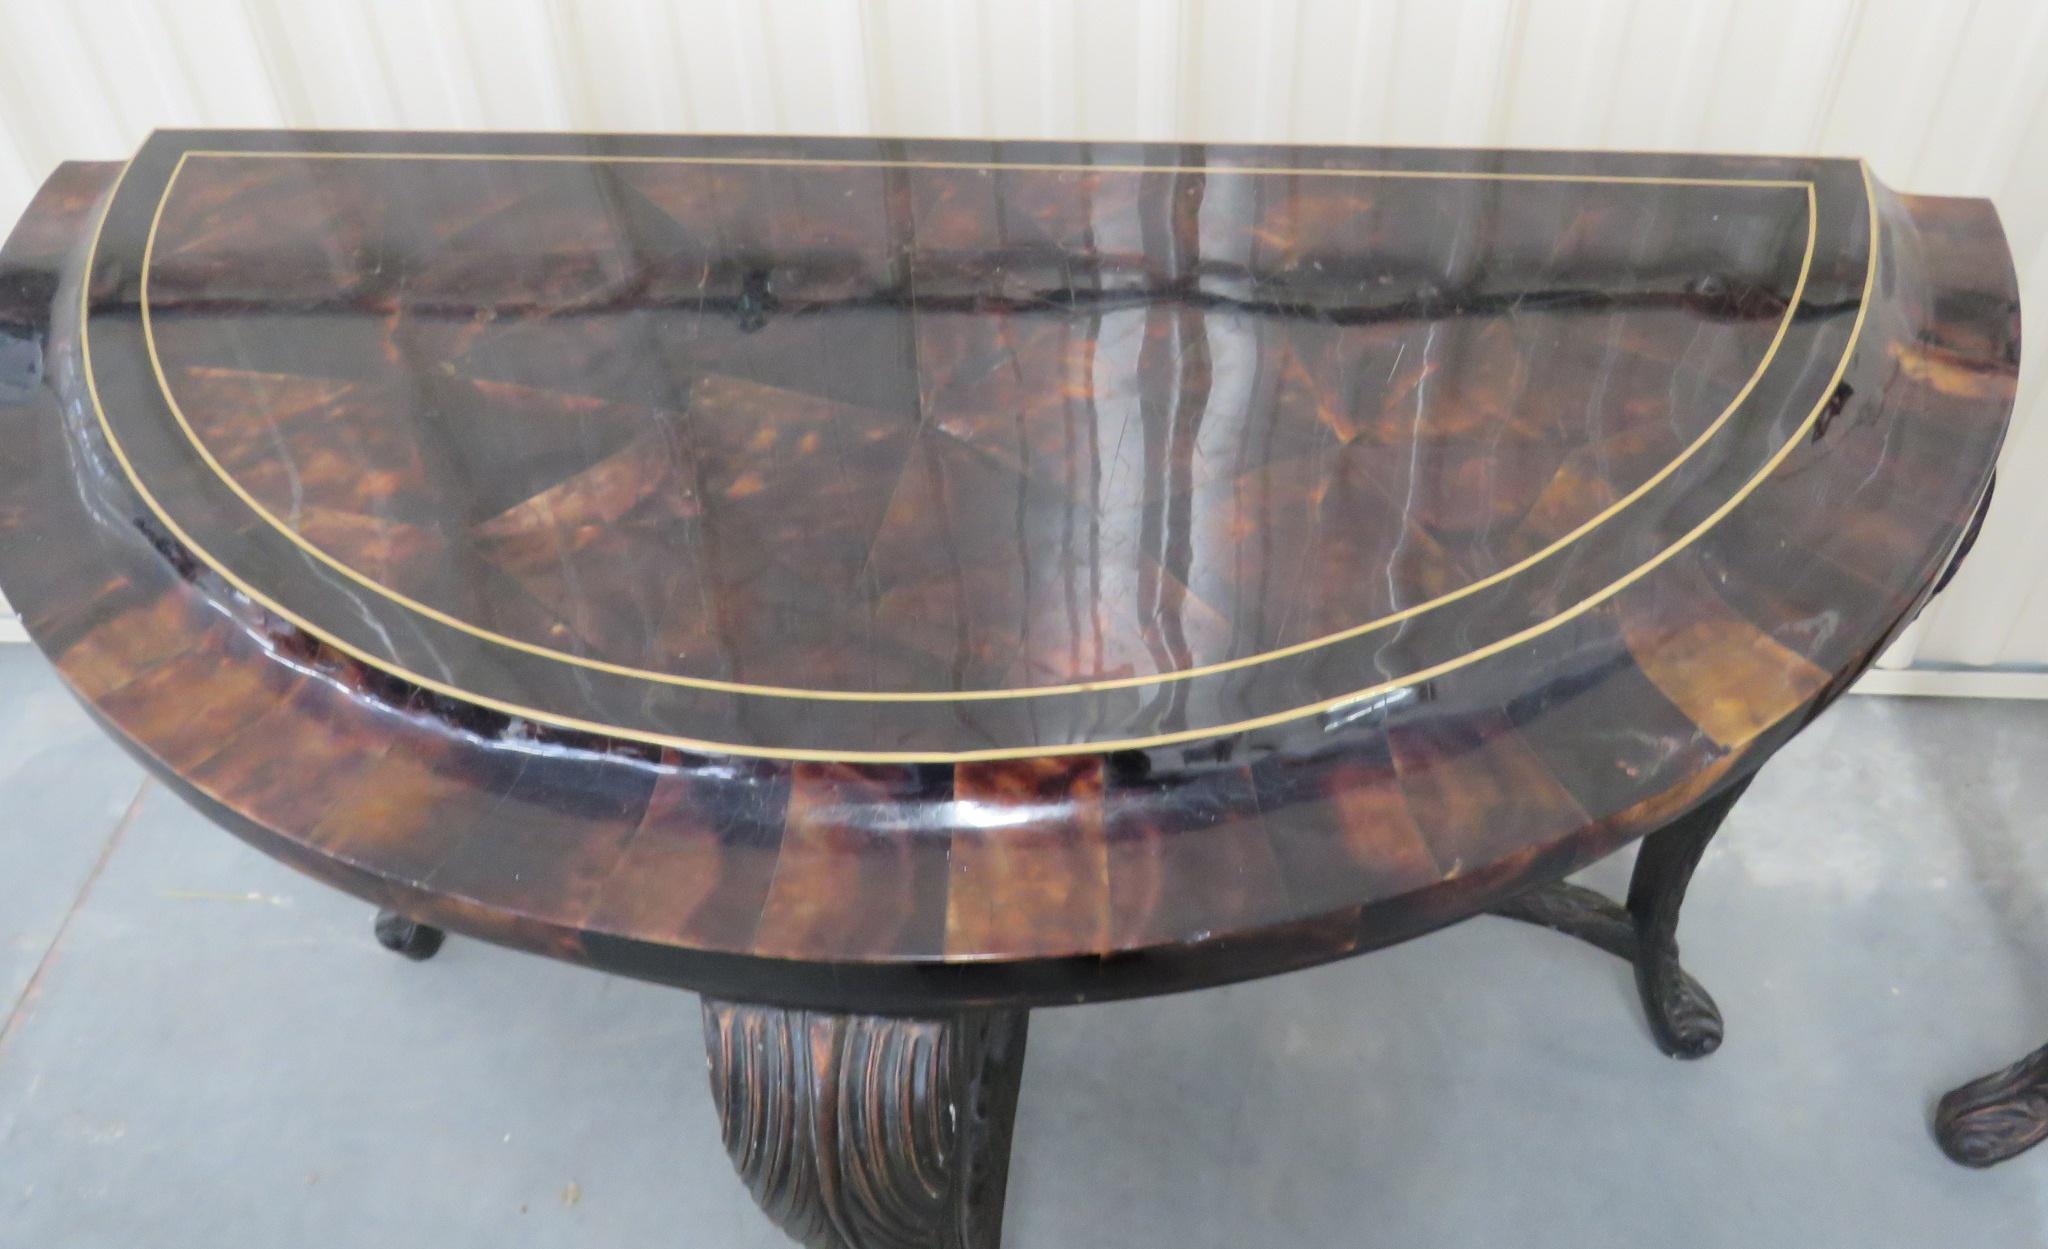 These are absolutely amazing tables made with tasselated tortoise shell and carved walnut frames depicting acanthus leaves and carved swans on the base. The tables have a rich look and are certainly unique and one-of-a-kind. 